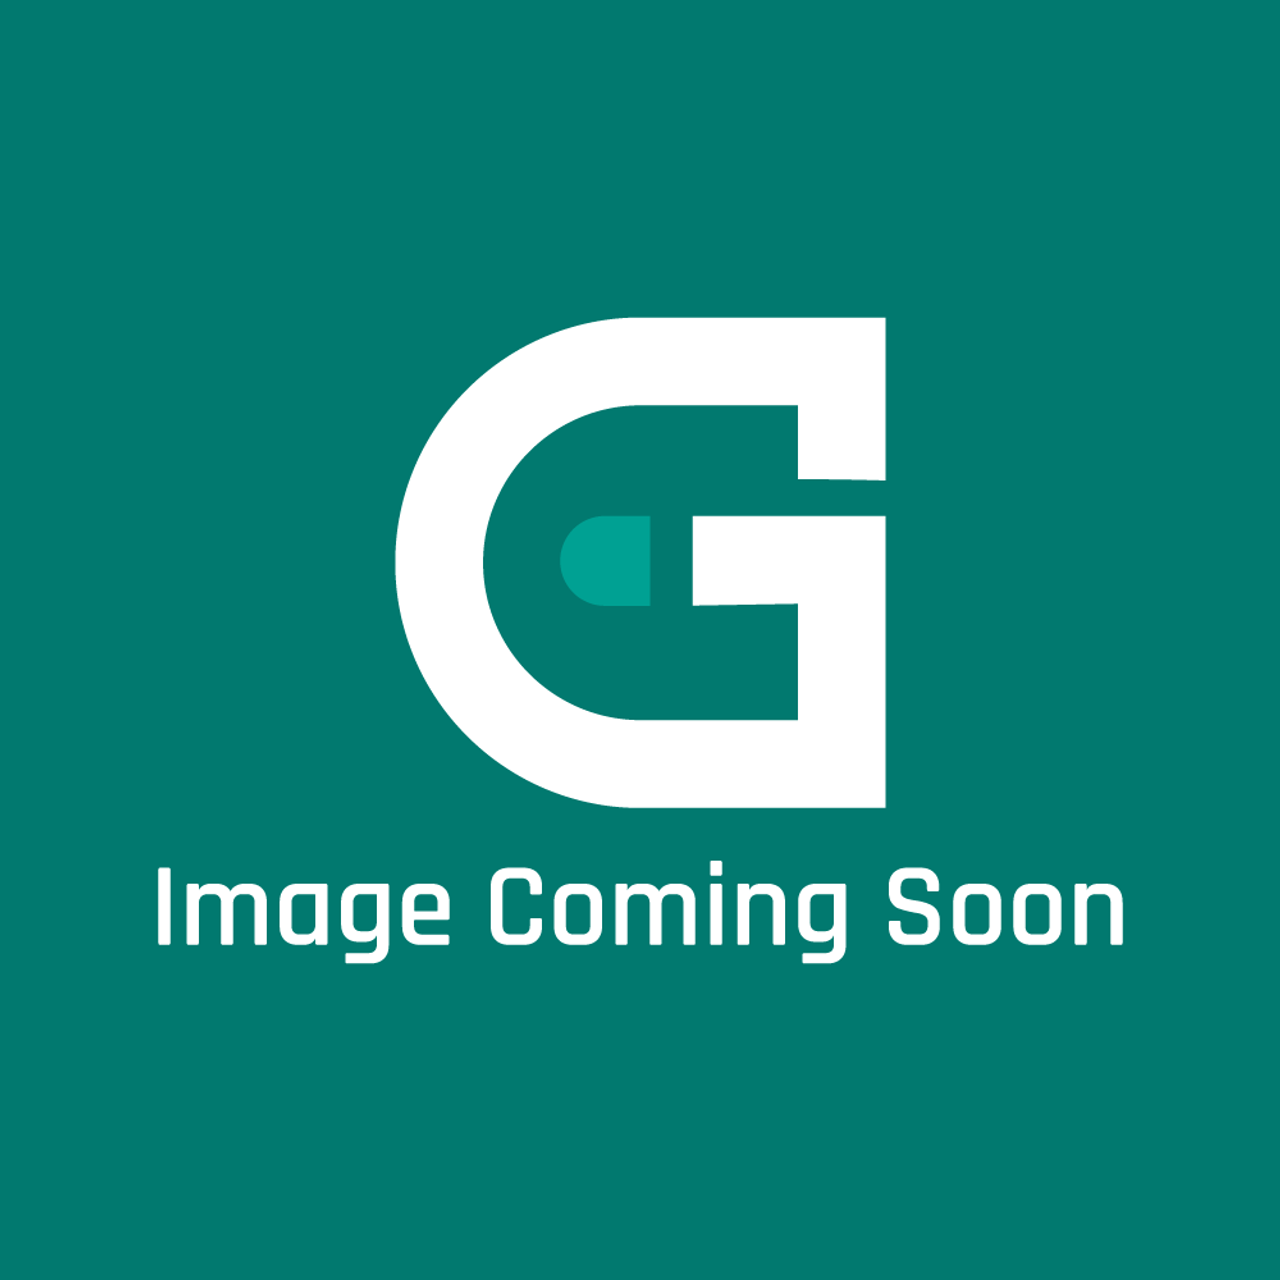 Frigidaire - Electrolux 316415001 Glide - Image Coming Soon!